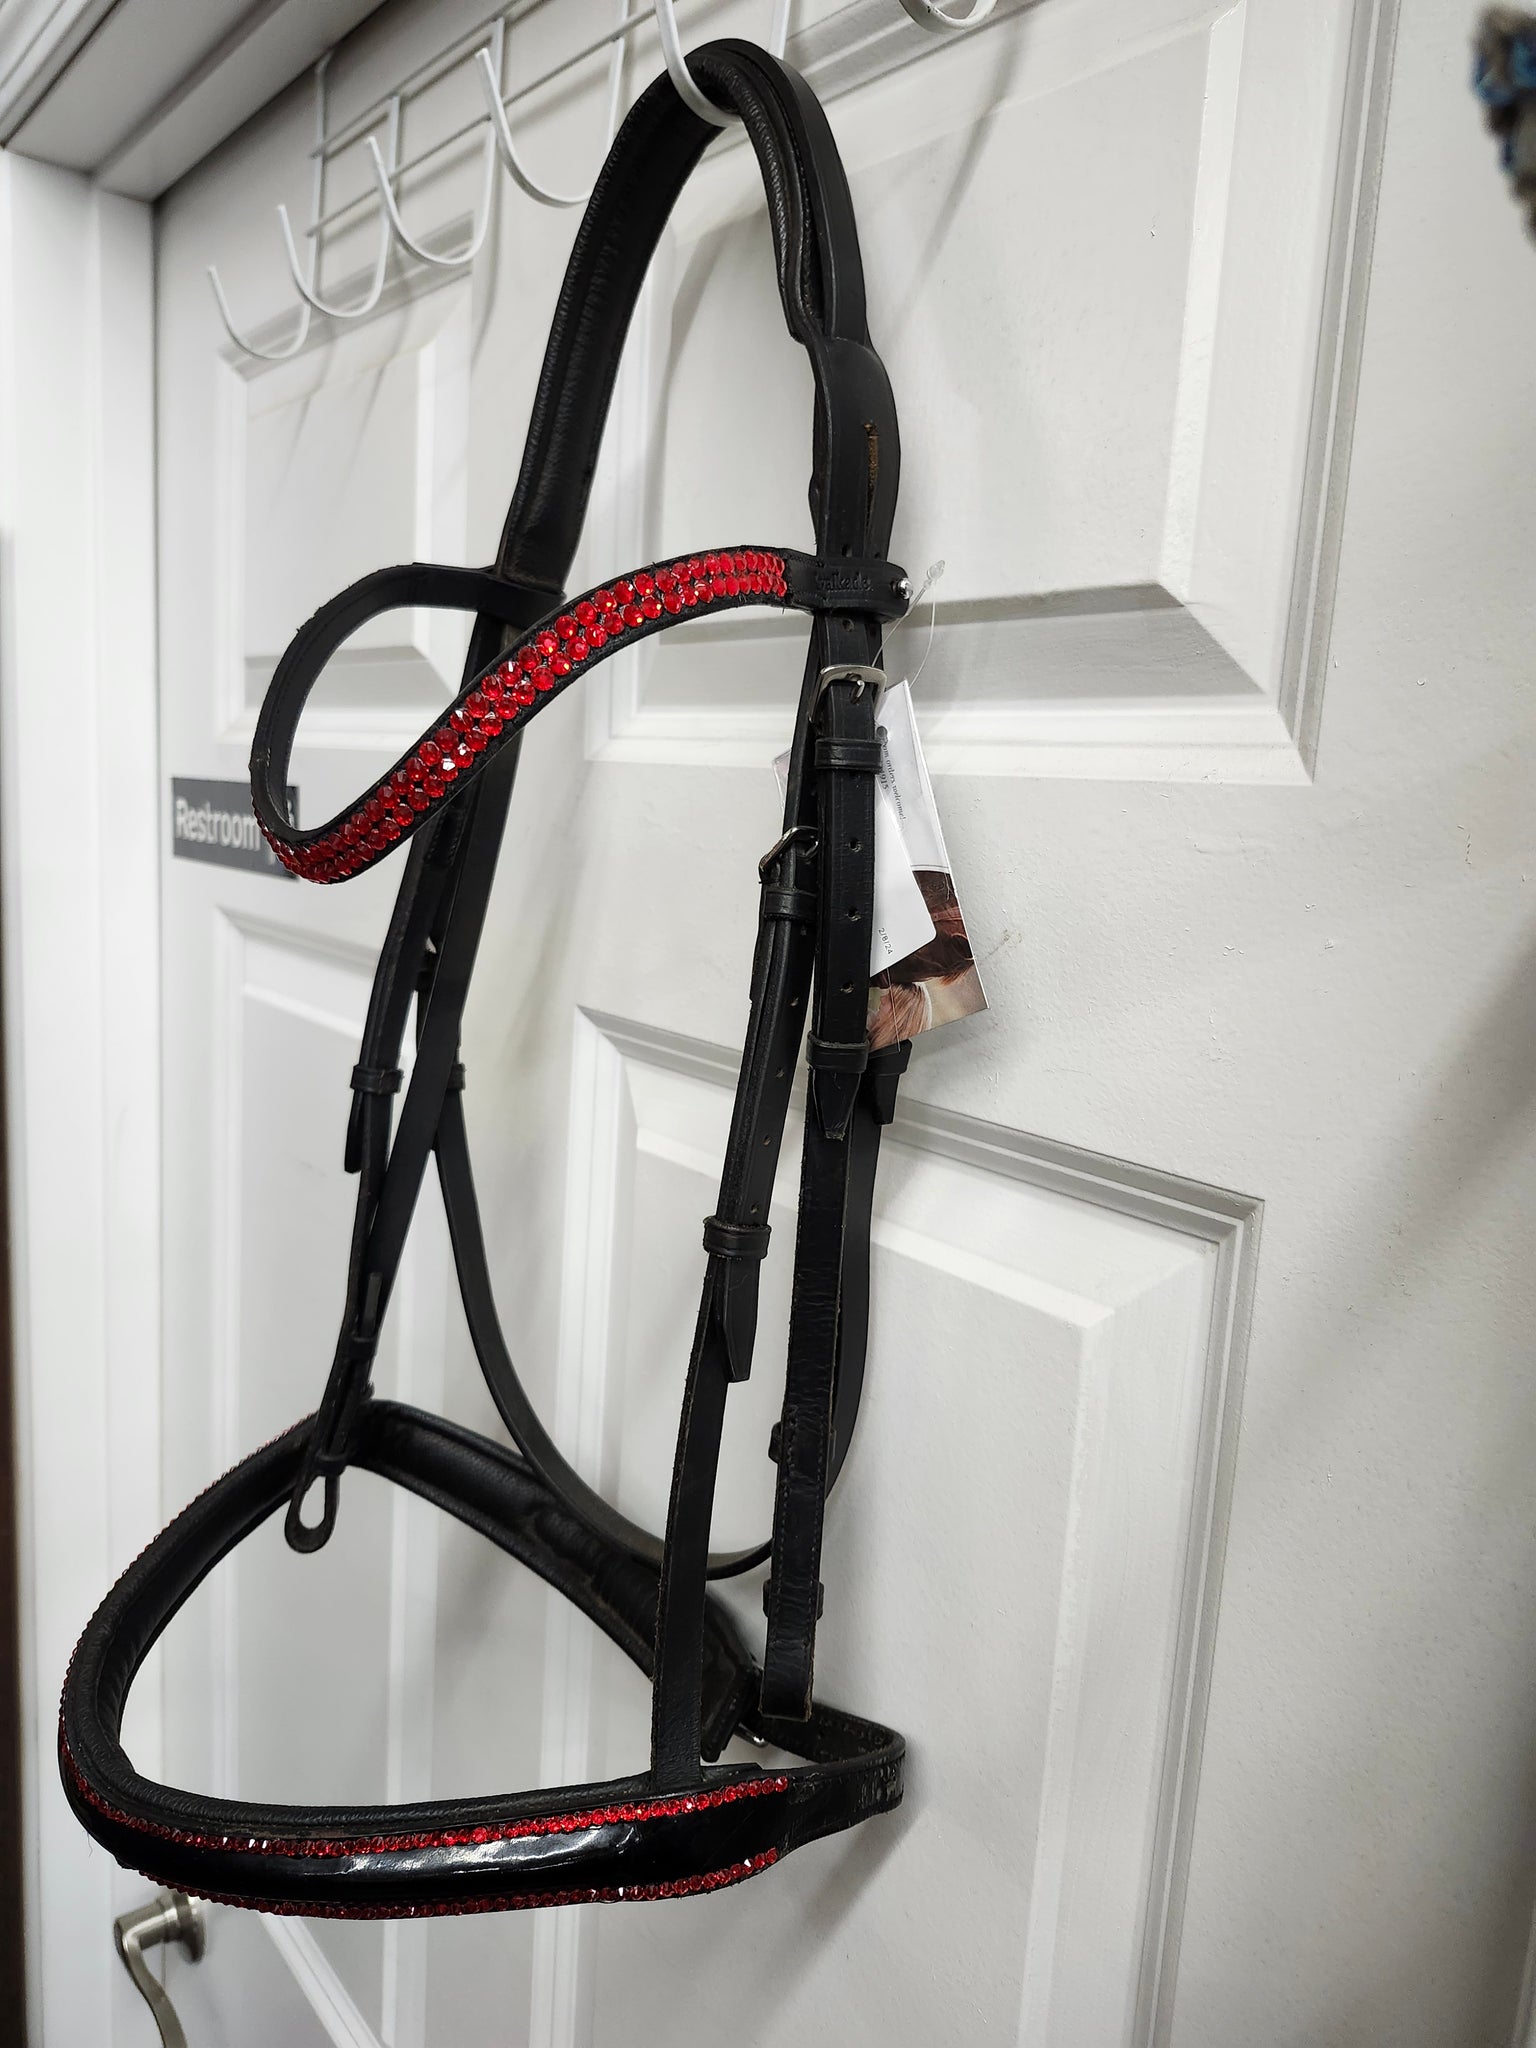 Kavalkade dressage bridle with bling brow. Full size.